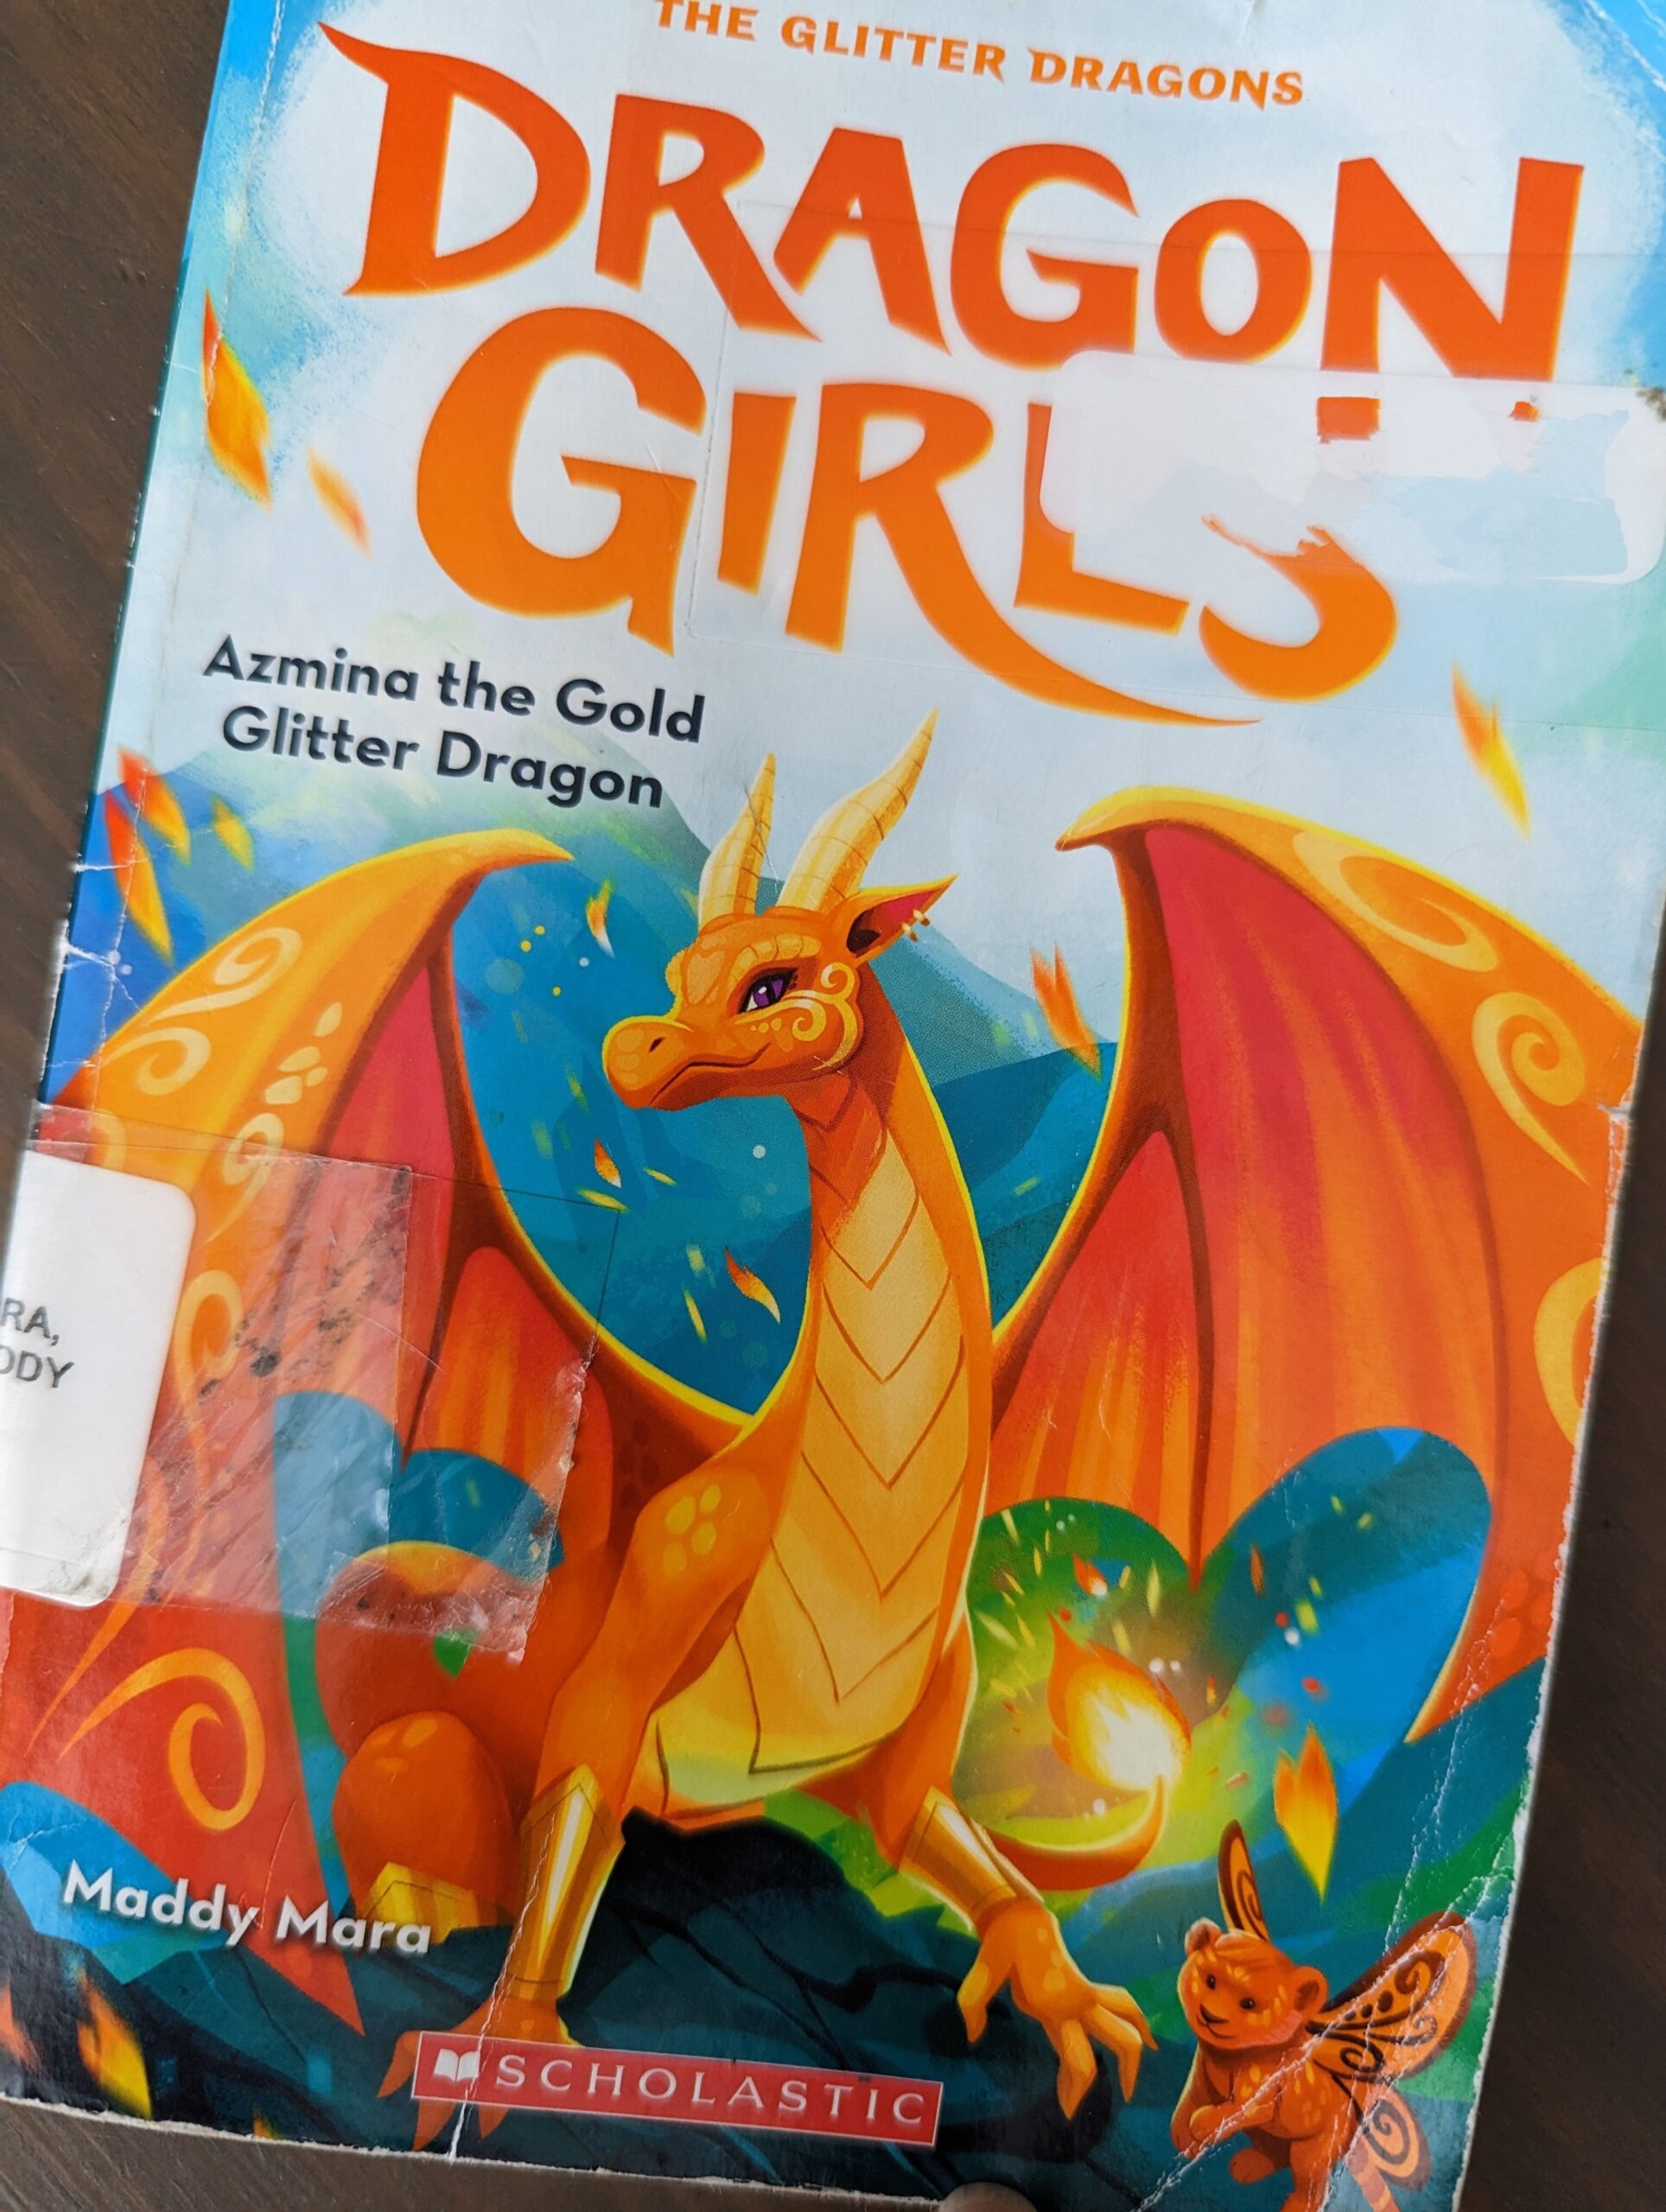 Book cover for the first book in the Dragon Girl series "Azmina the Gold Glitter Dragon" by Maddy Mara